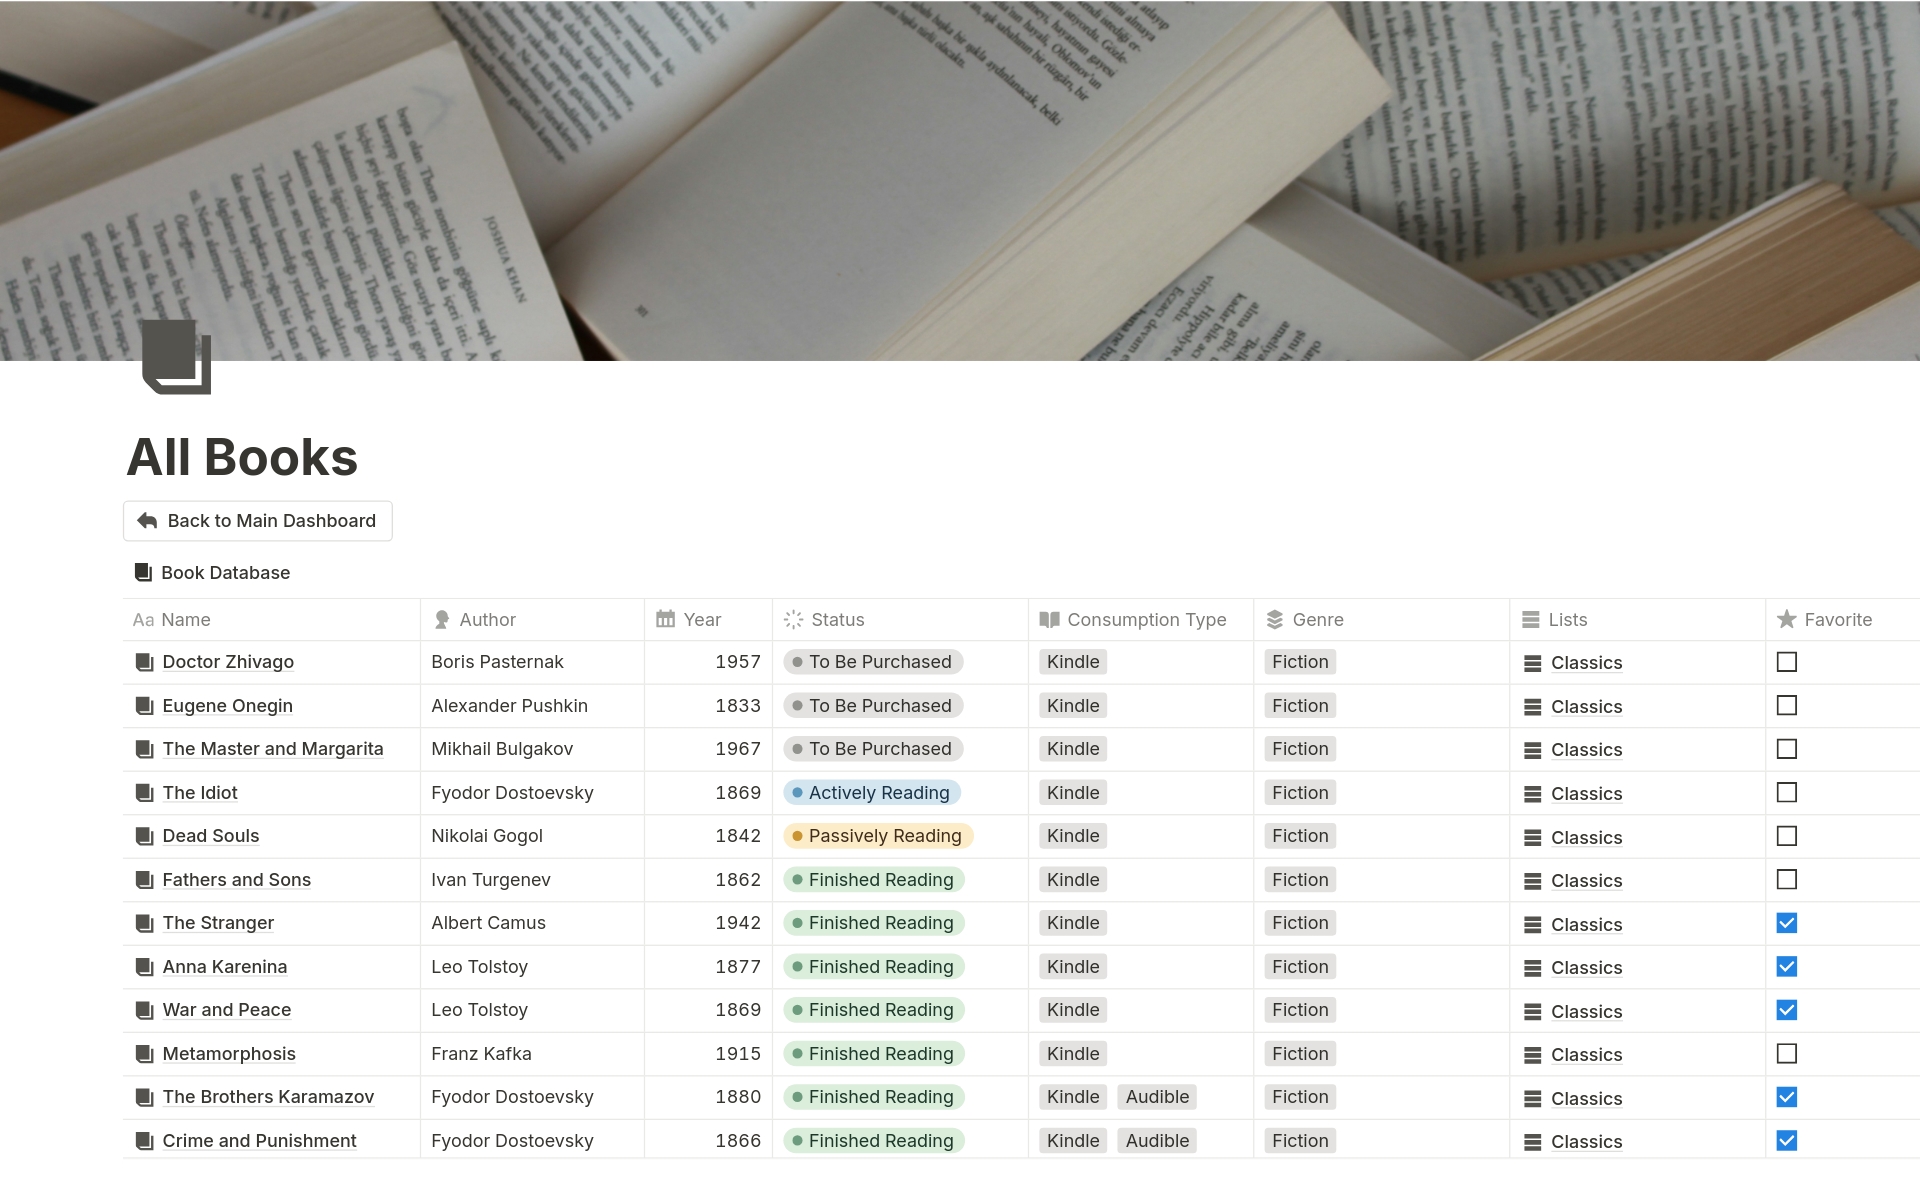 The Curator's Book Reading List is a streamlined digital library designed for the avid reader and curator.